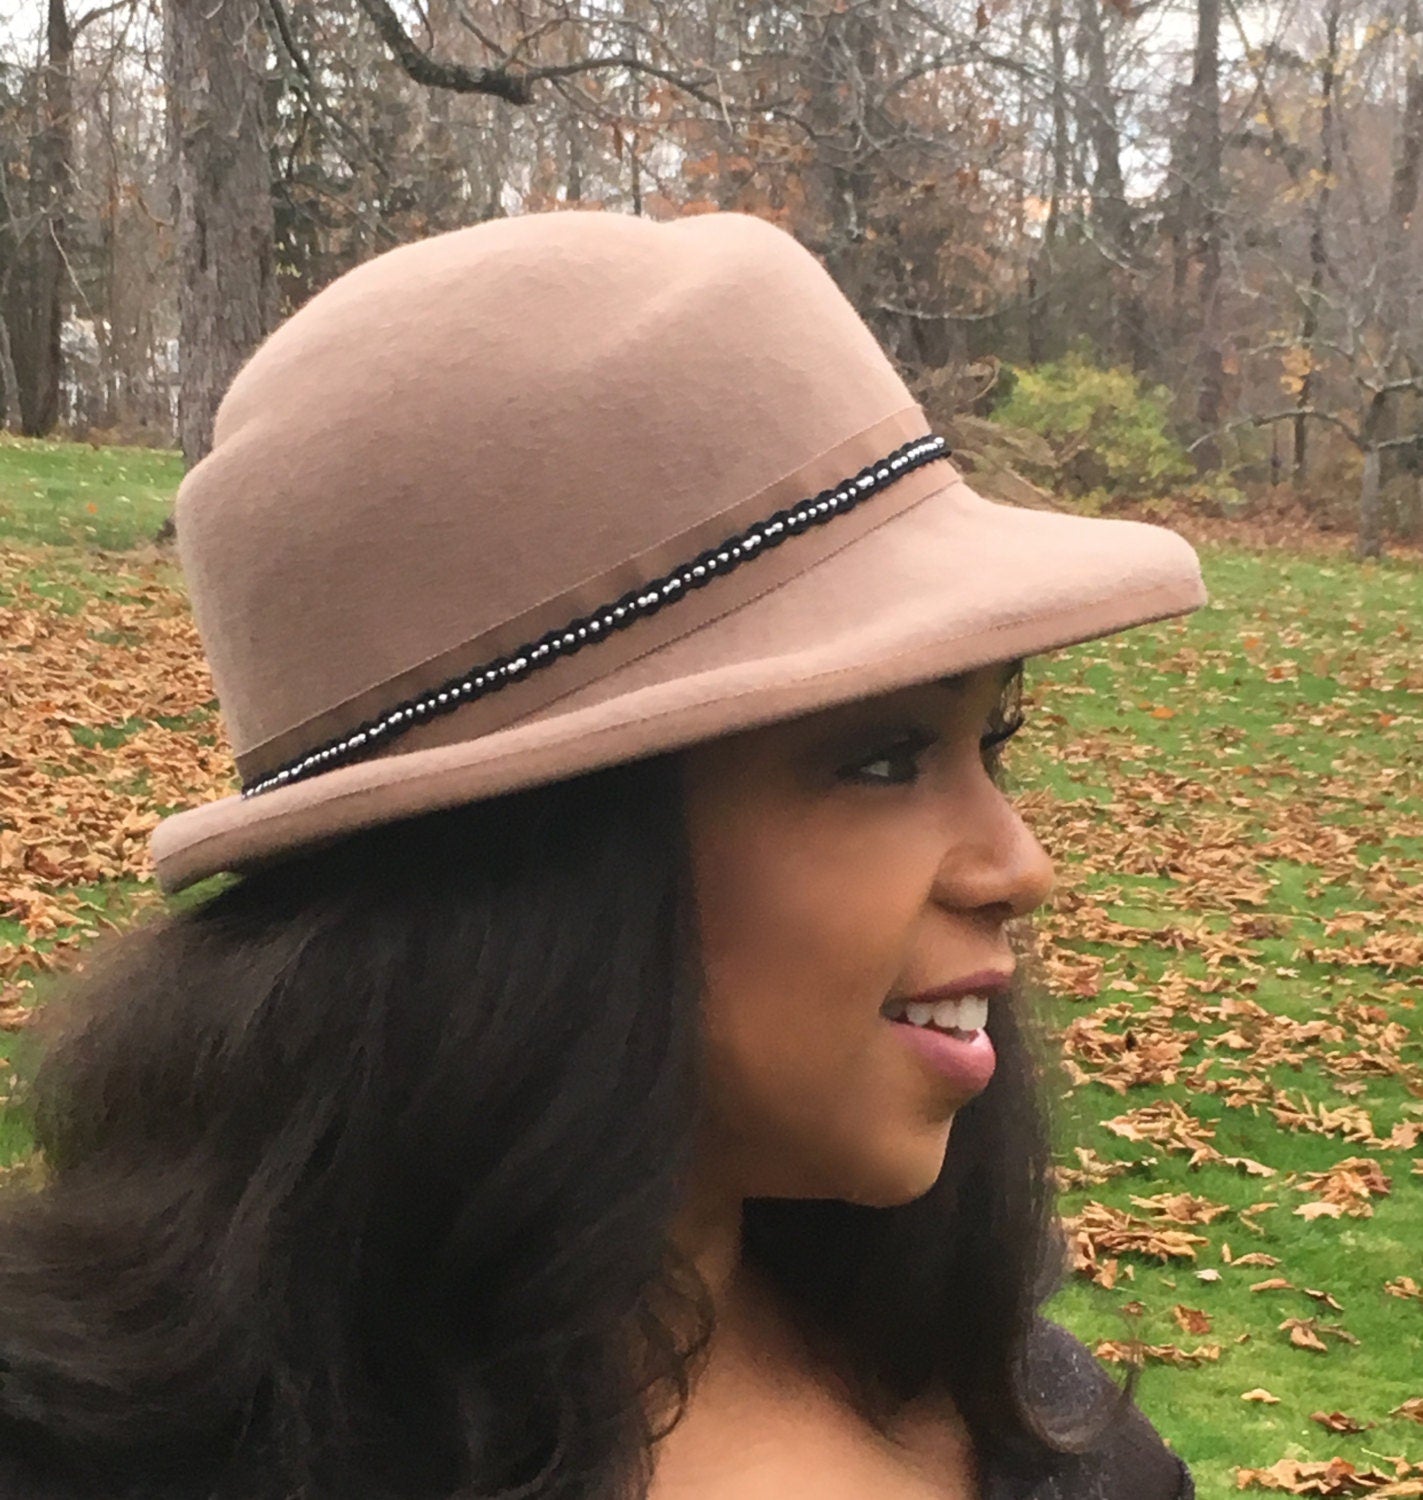 Tan Wool Felt Fedora Style Hat with Black Trim and Ostrich Feathers-Silver bead Trim on Band-Black Velvet Ribbon Bow-Church Hat-Wedding! WOW